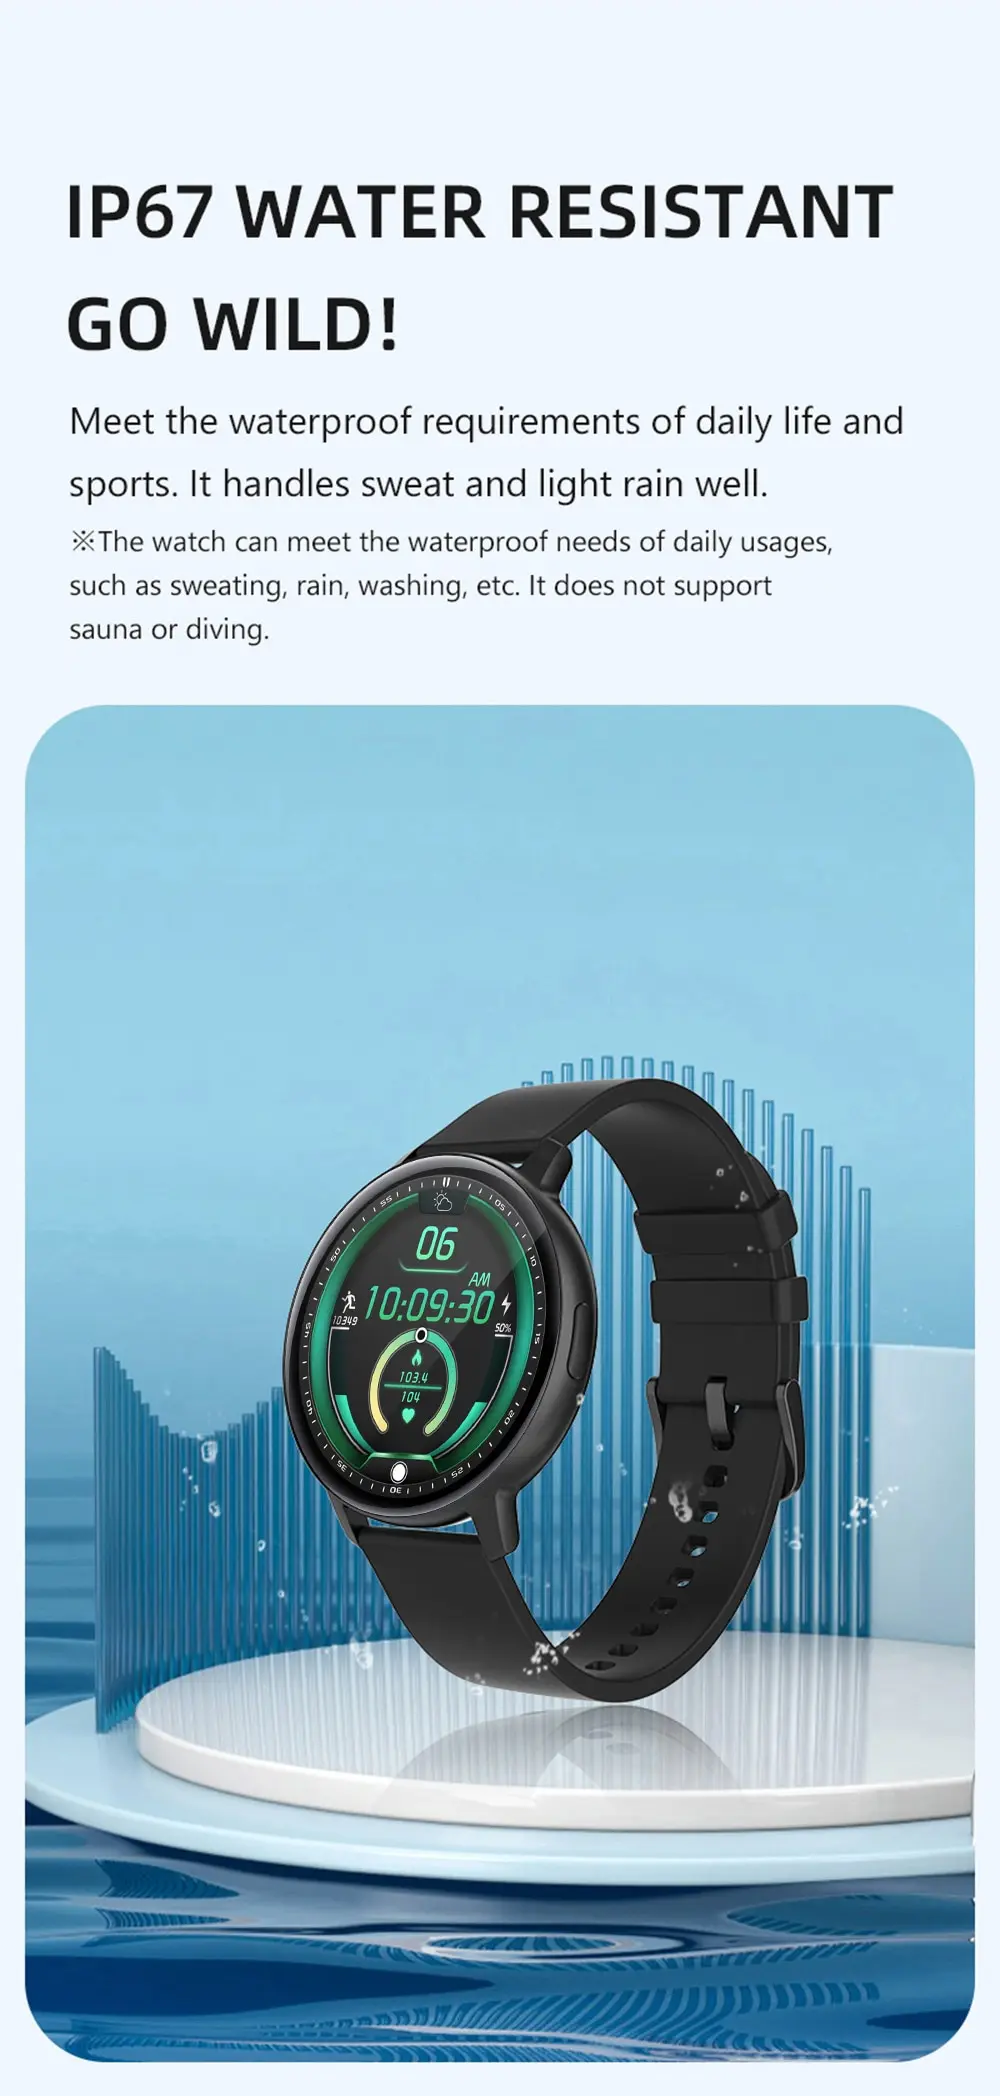 COLMI I31 Smartwatch 1.43 Inch AMOLED Screen 100 Sports Modes 7 Day Battery Life Always On Display Smart Watch Men Women